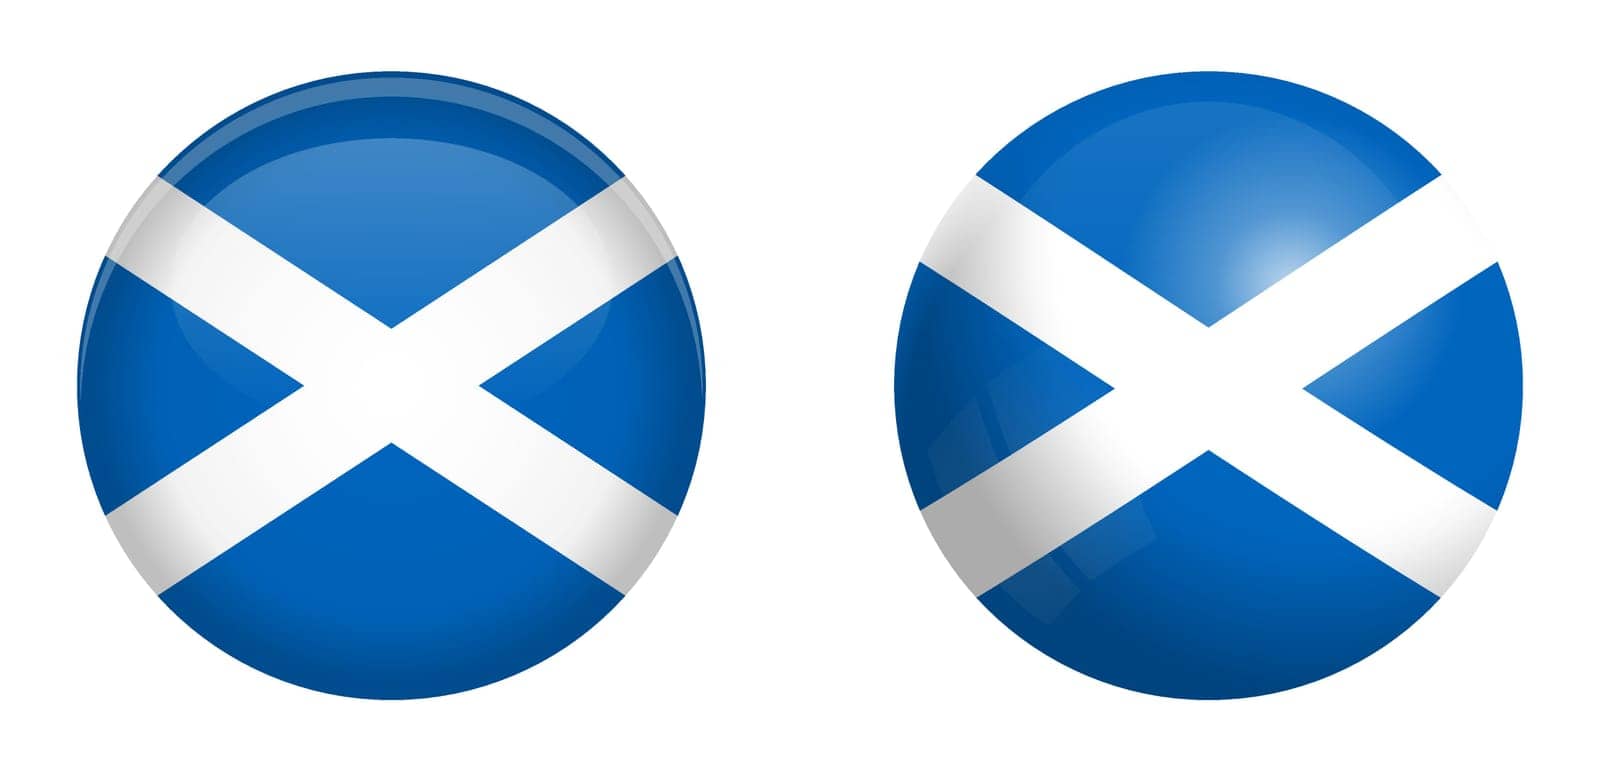 Scotland flag under 3d dome button and on glossy sphere / ball.